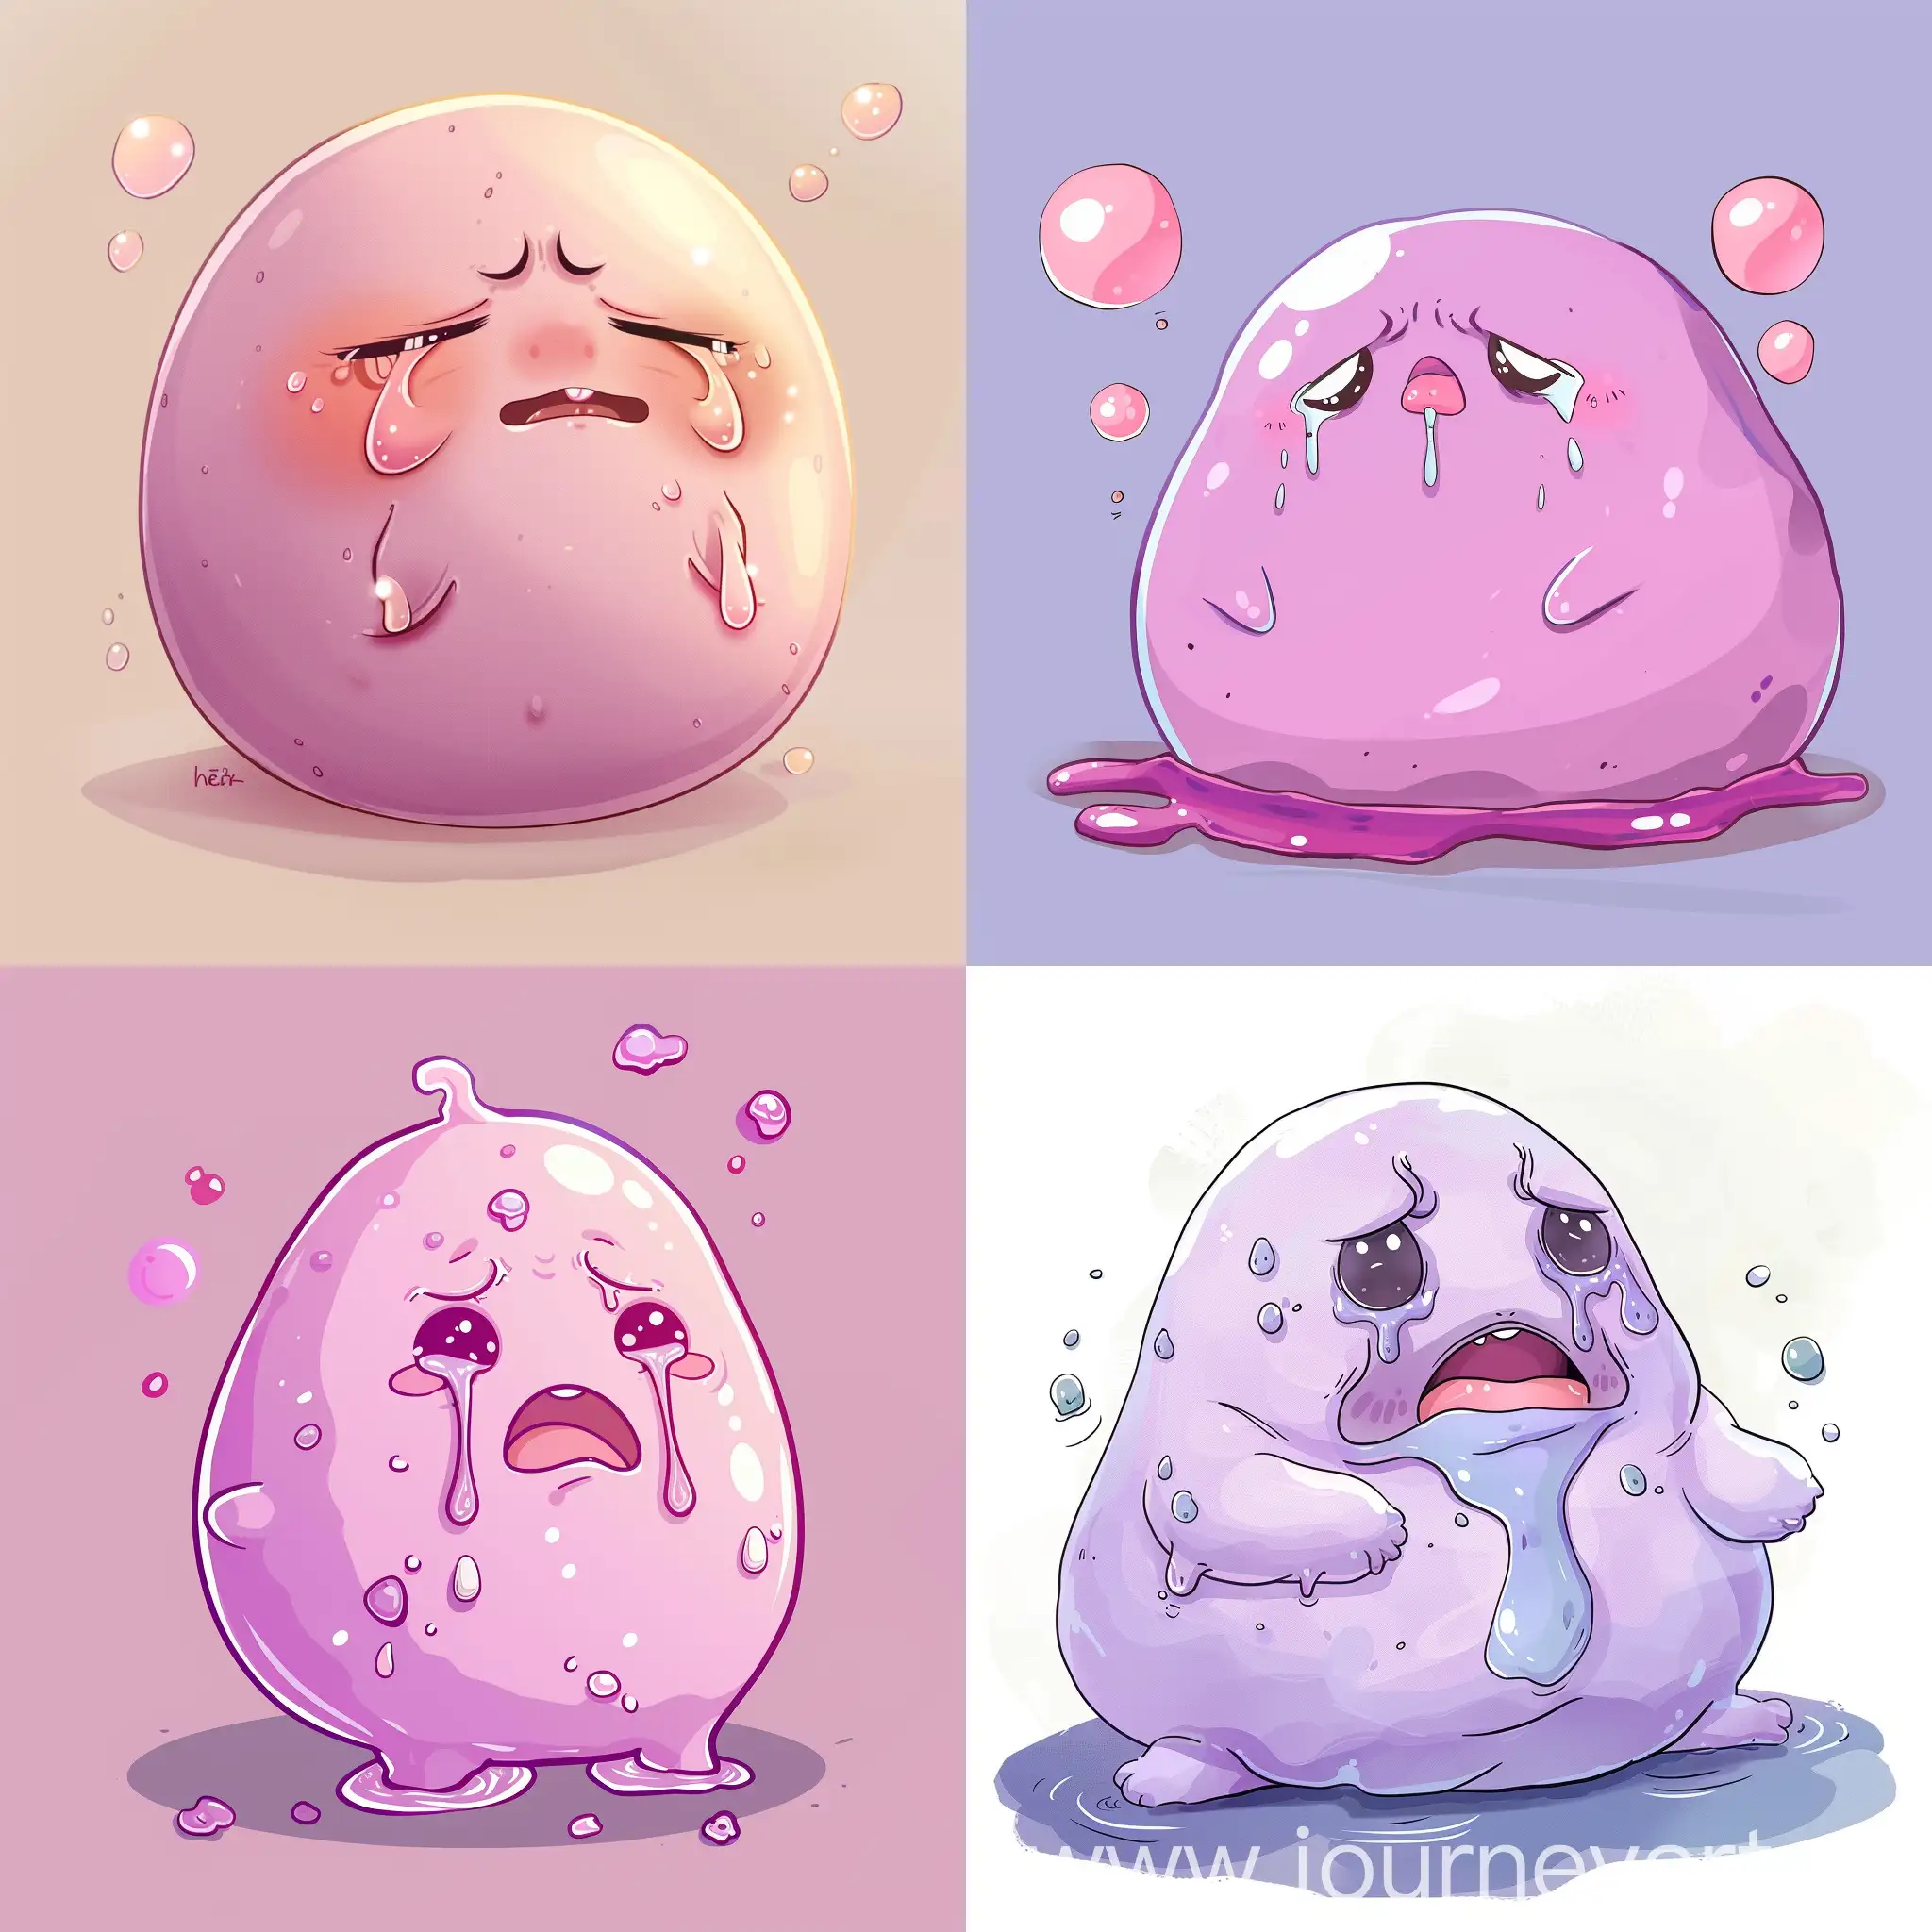 cute fat slime is crying very hard,he fart1ng by the way, kawaii art